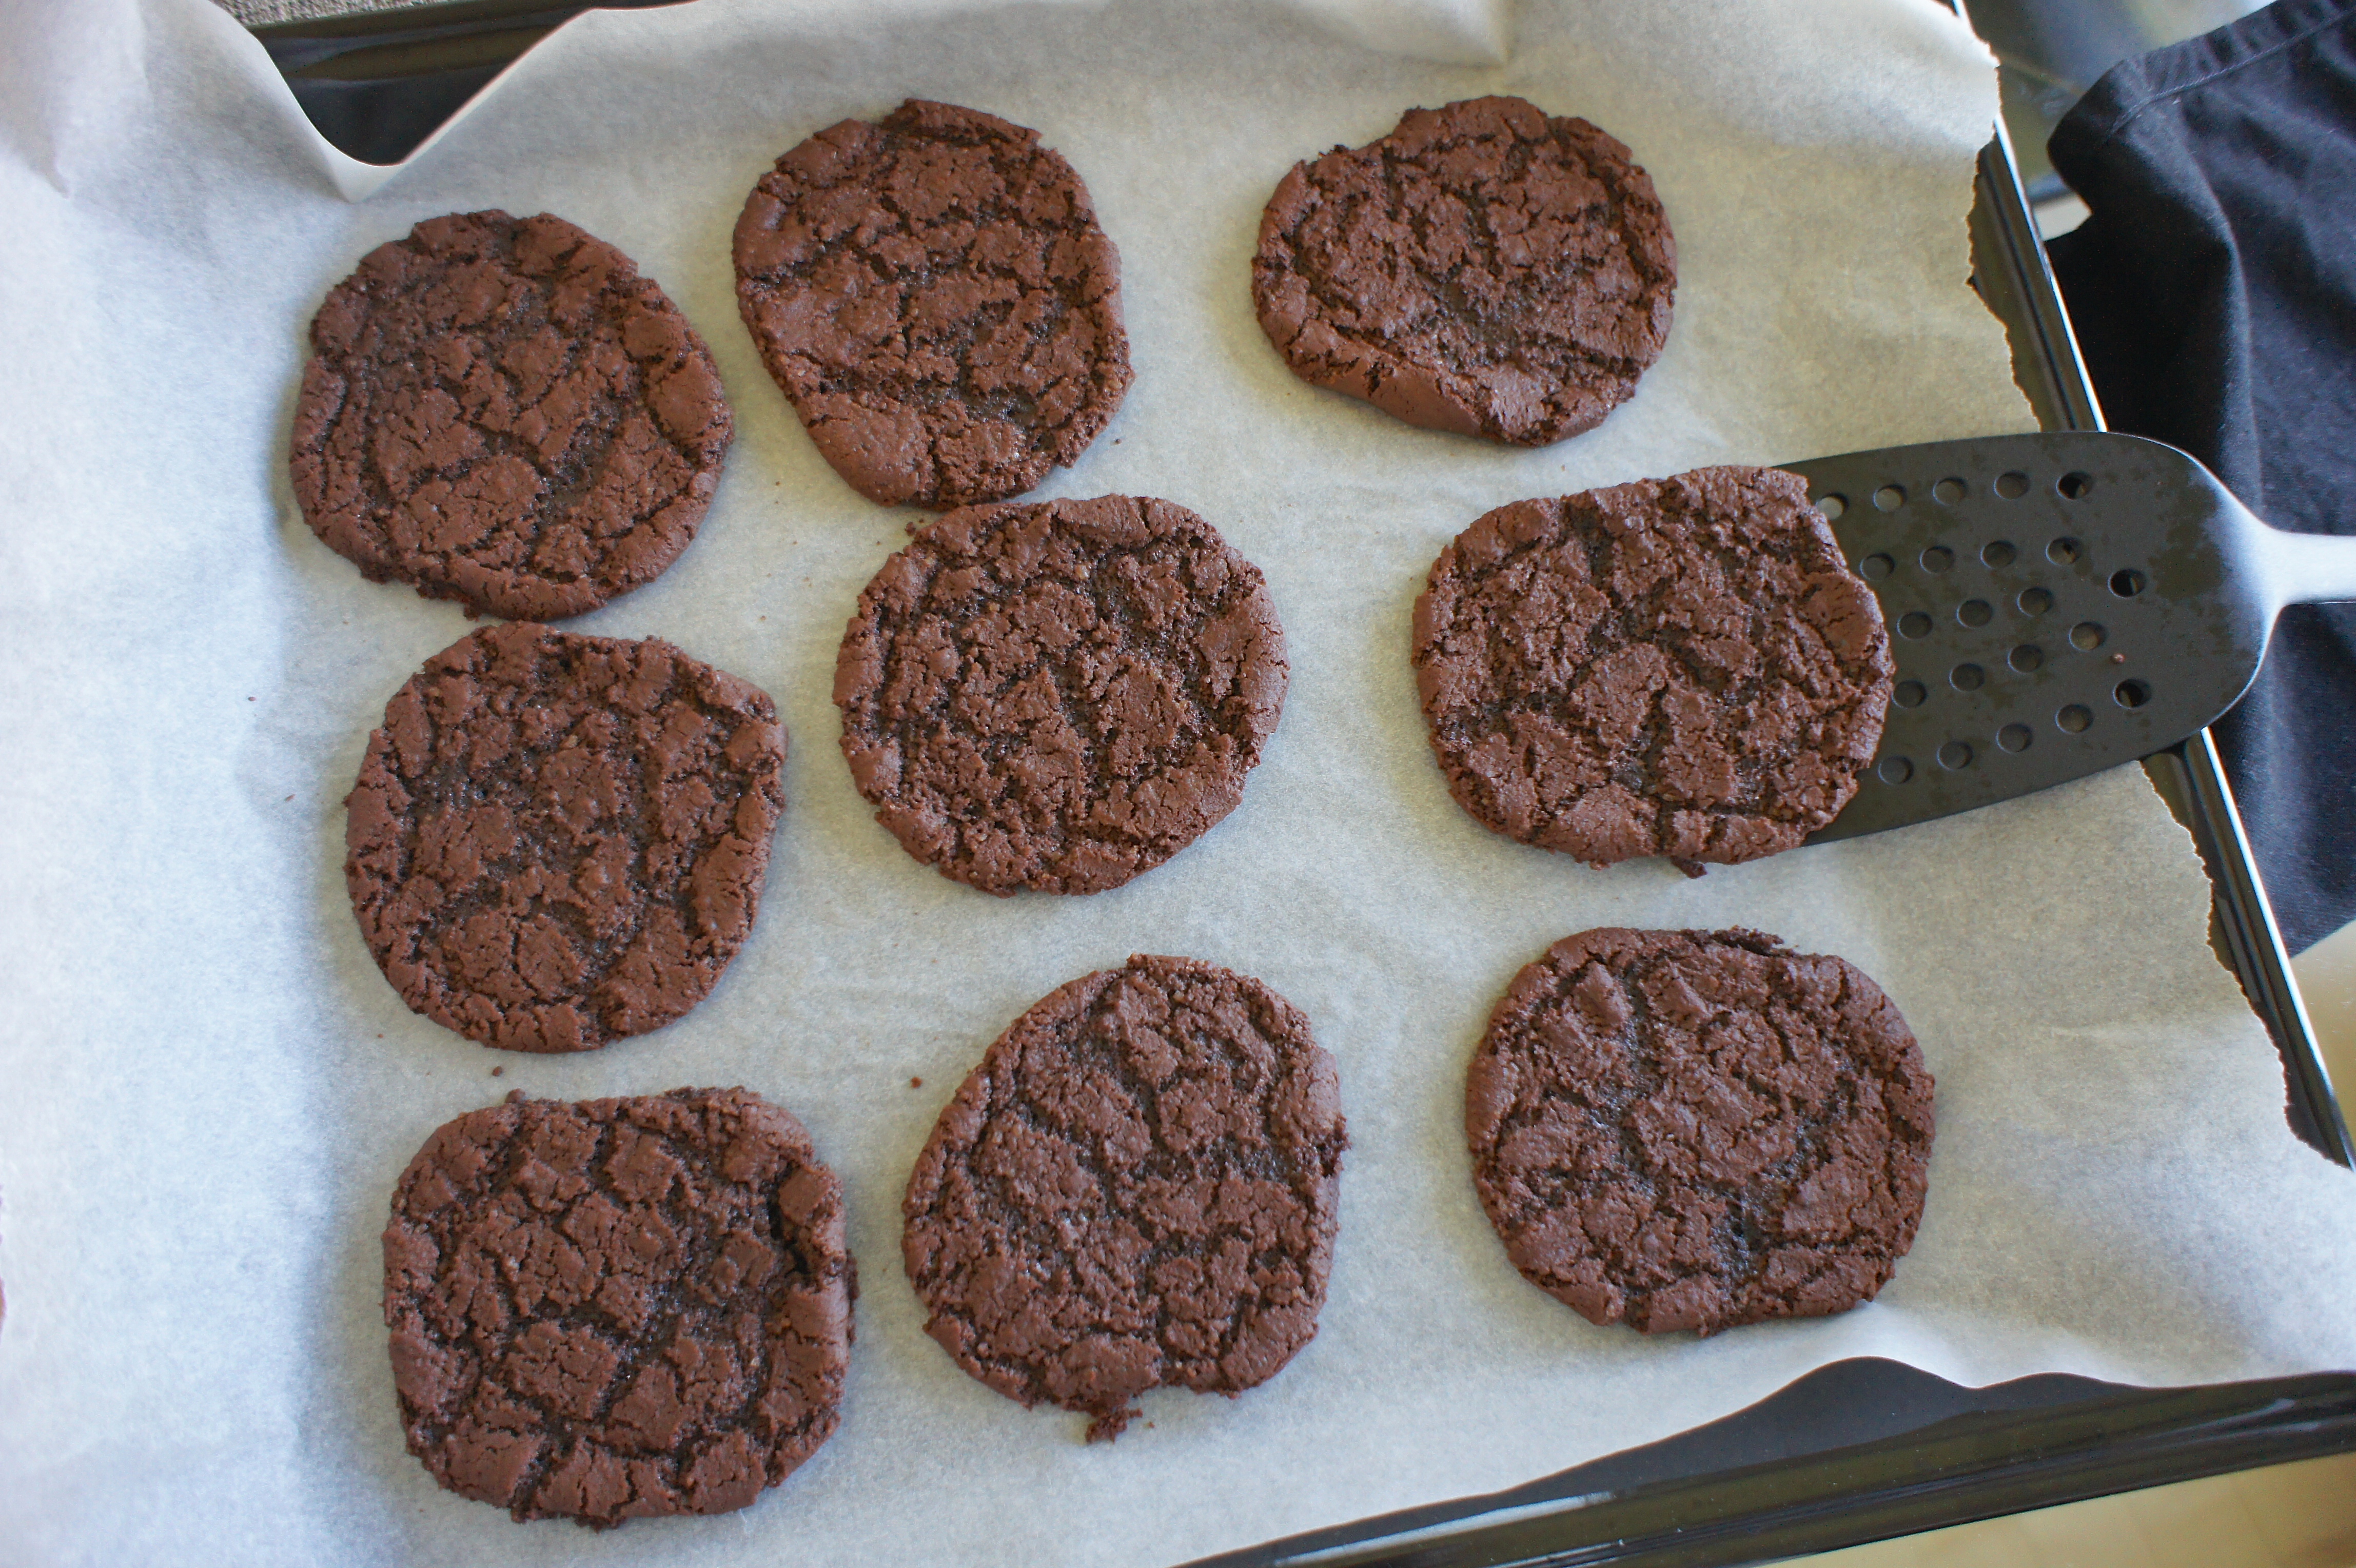 Chocolate sugar cookies on a tray with baking sheets